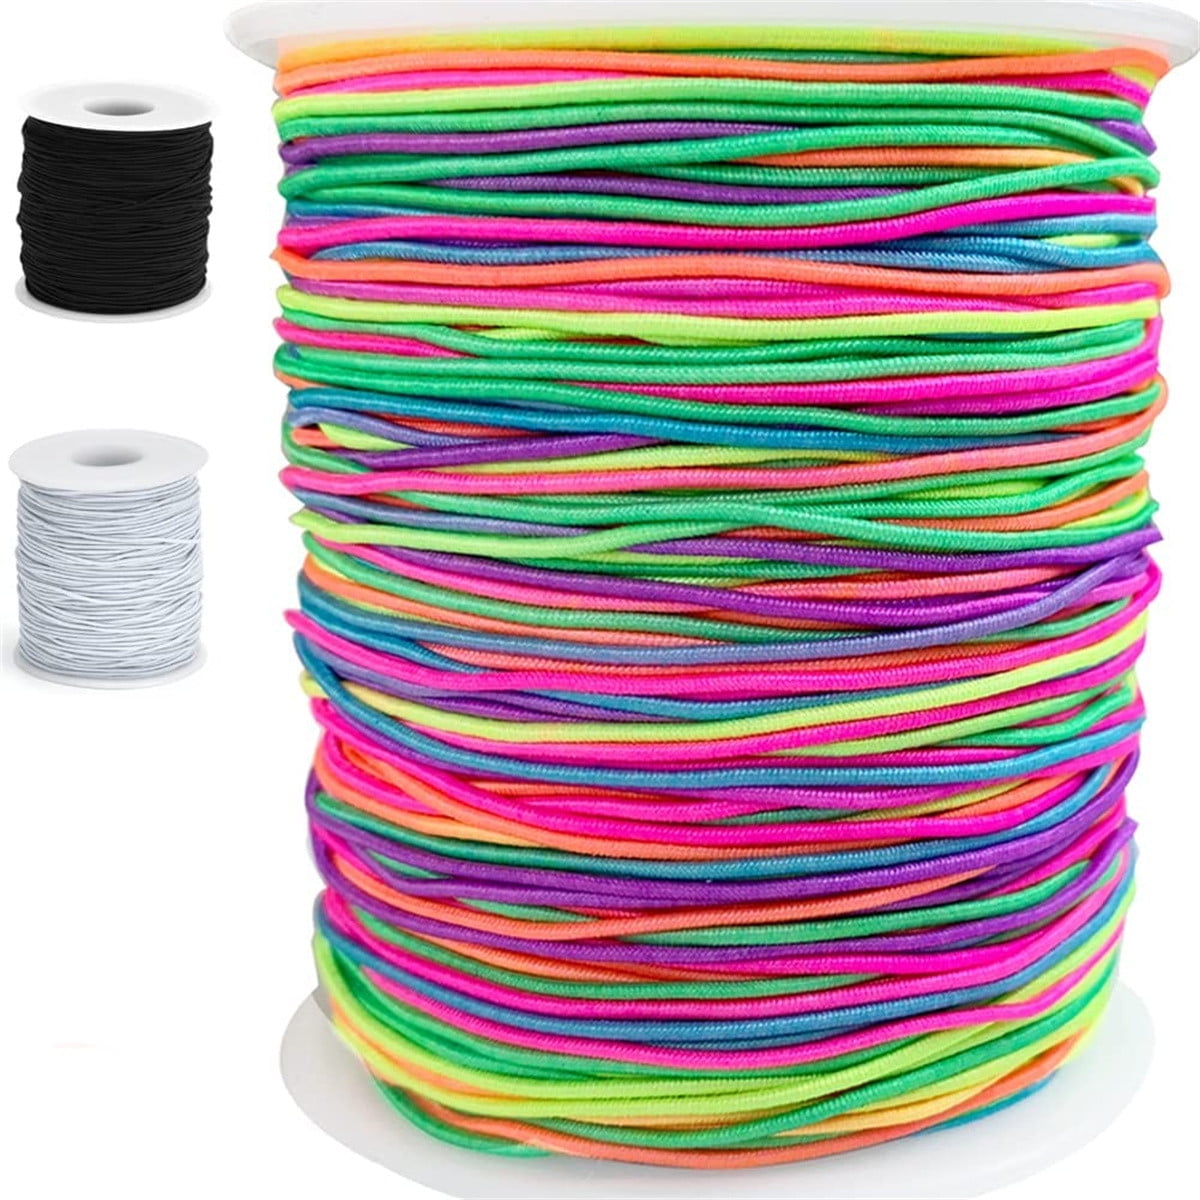 Casewin Elastic String for Pony Beads for Kids, 1mm Rainbow Elastic Cord  String for Bracelet Making, Colorful Stretchy Cord for Jewelry Making, 100m  Rainbow 